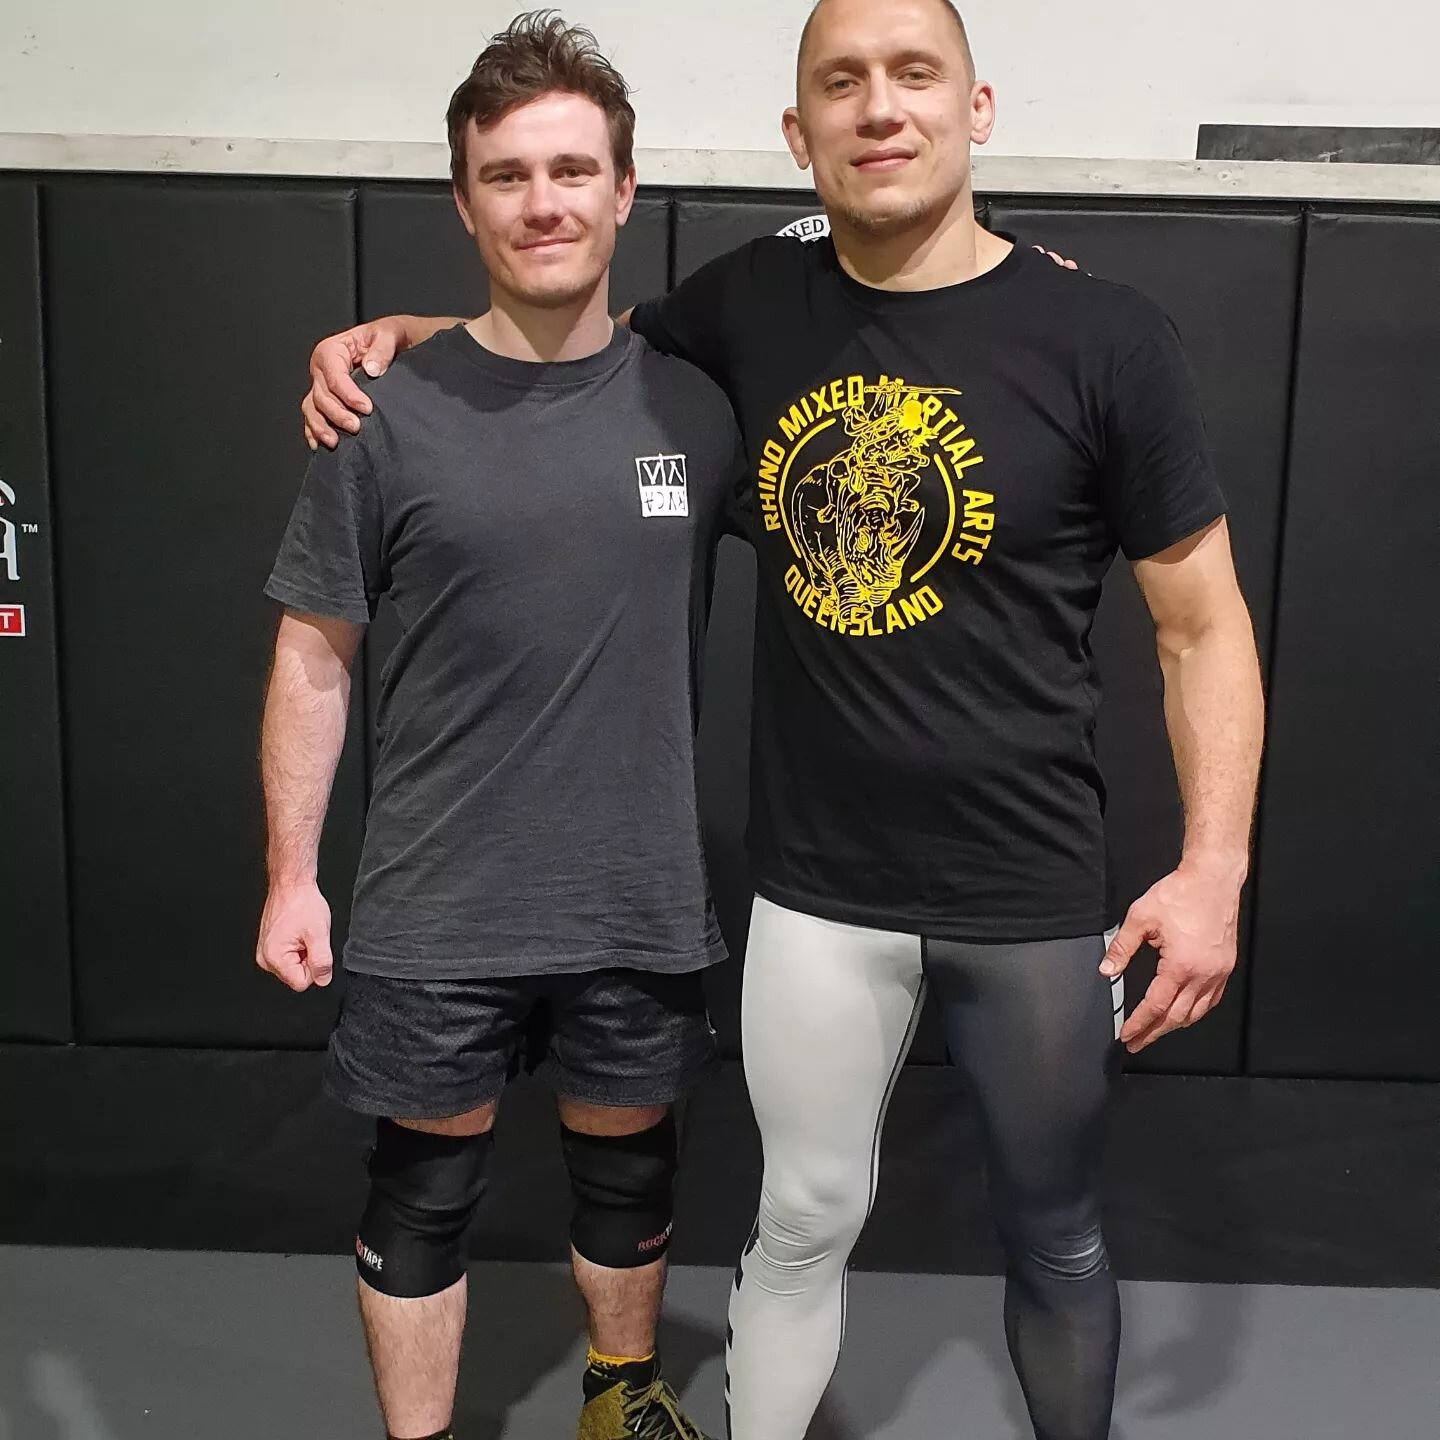 Had the pleasure of attending 3 excellent seminars over the weekend.

Shoutout to @paul_pasha_stolyar and @rhinommaqld for the experience 🔥

⚔ Tonight at Valor ⚔
5.30pm - BJJ Gi
6.30pm - MMA

Contact us and we can get you started with a free trial!
